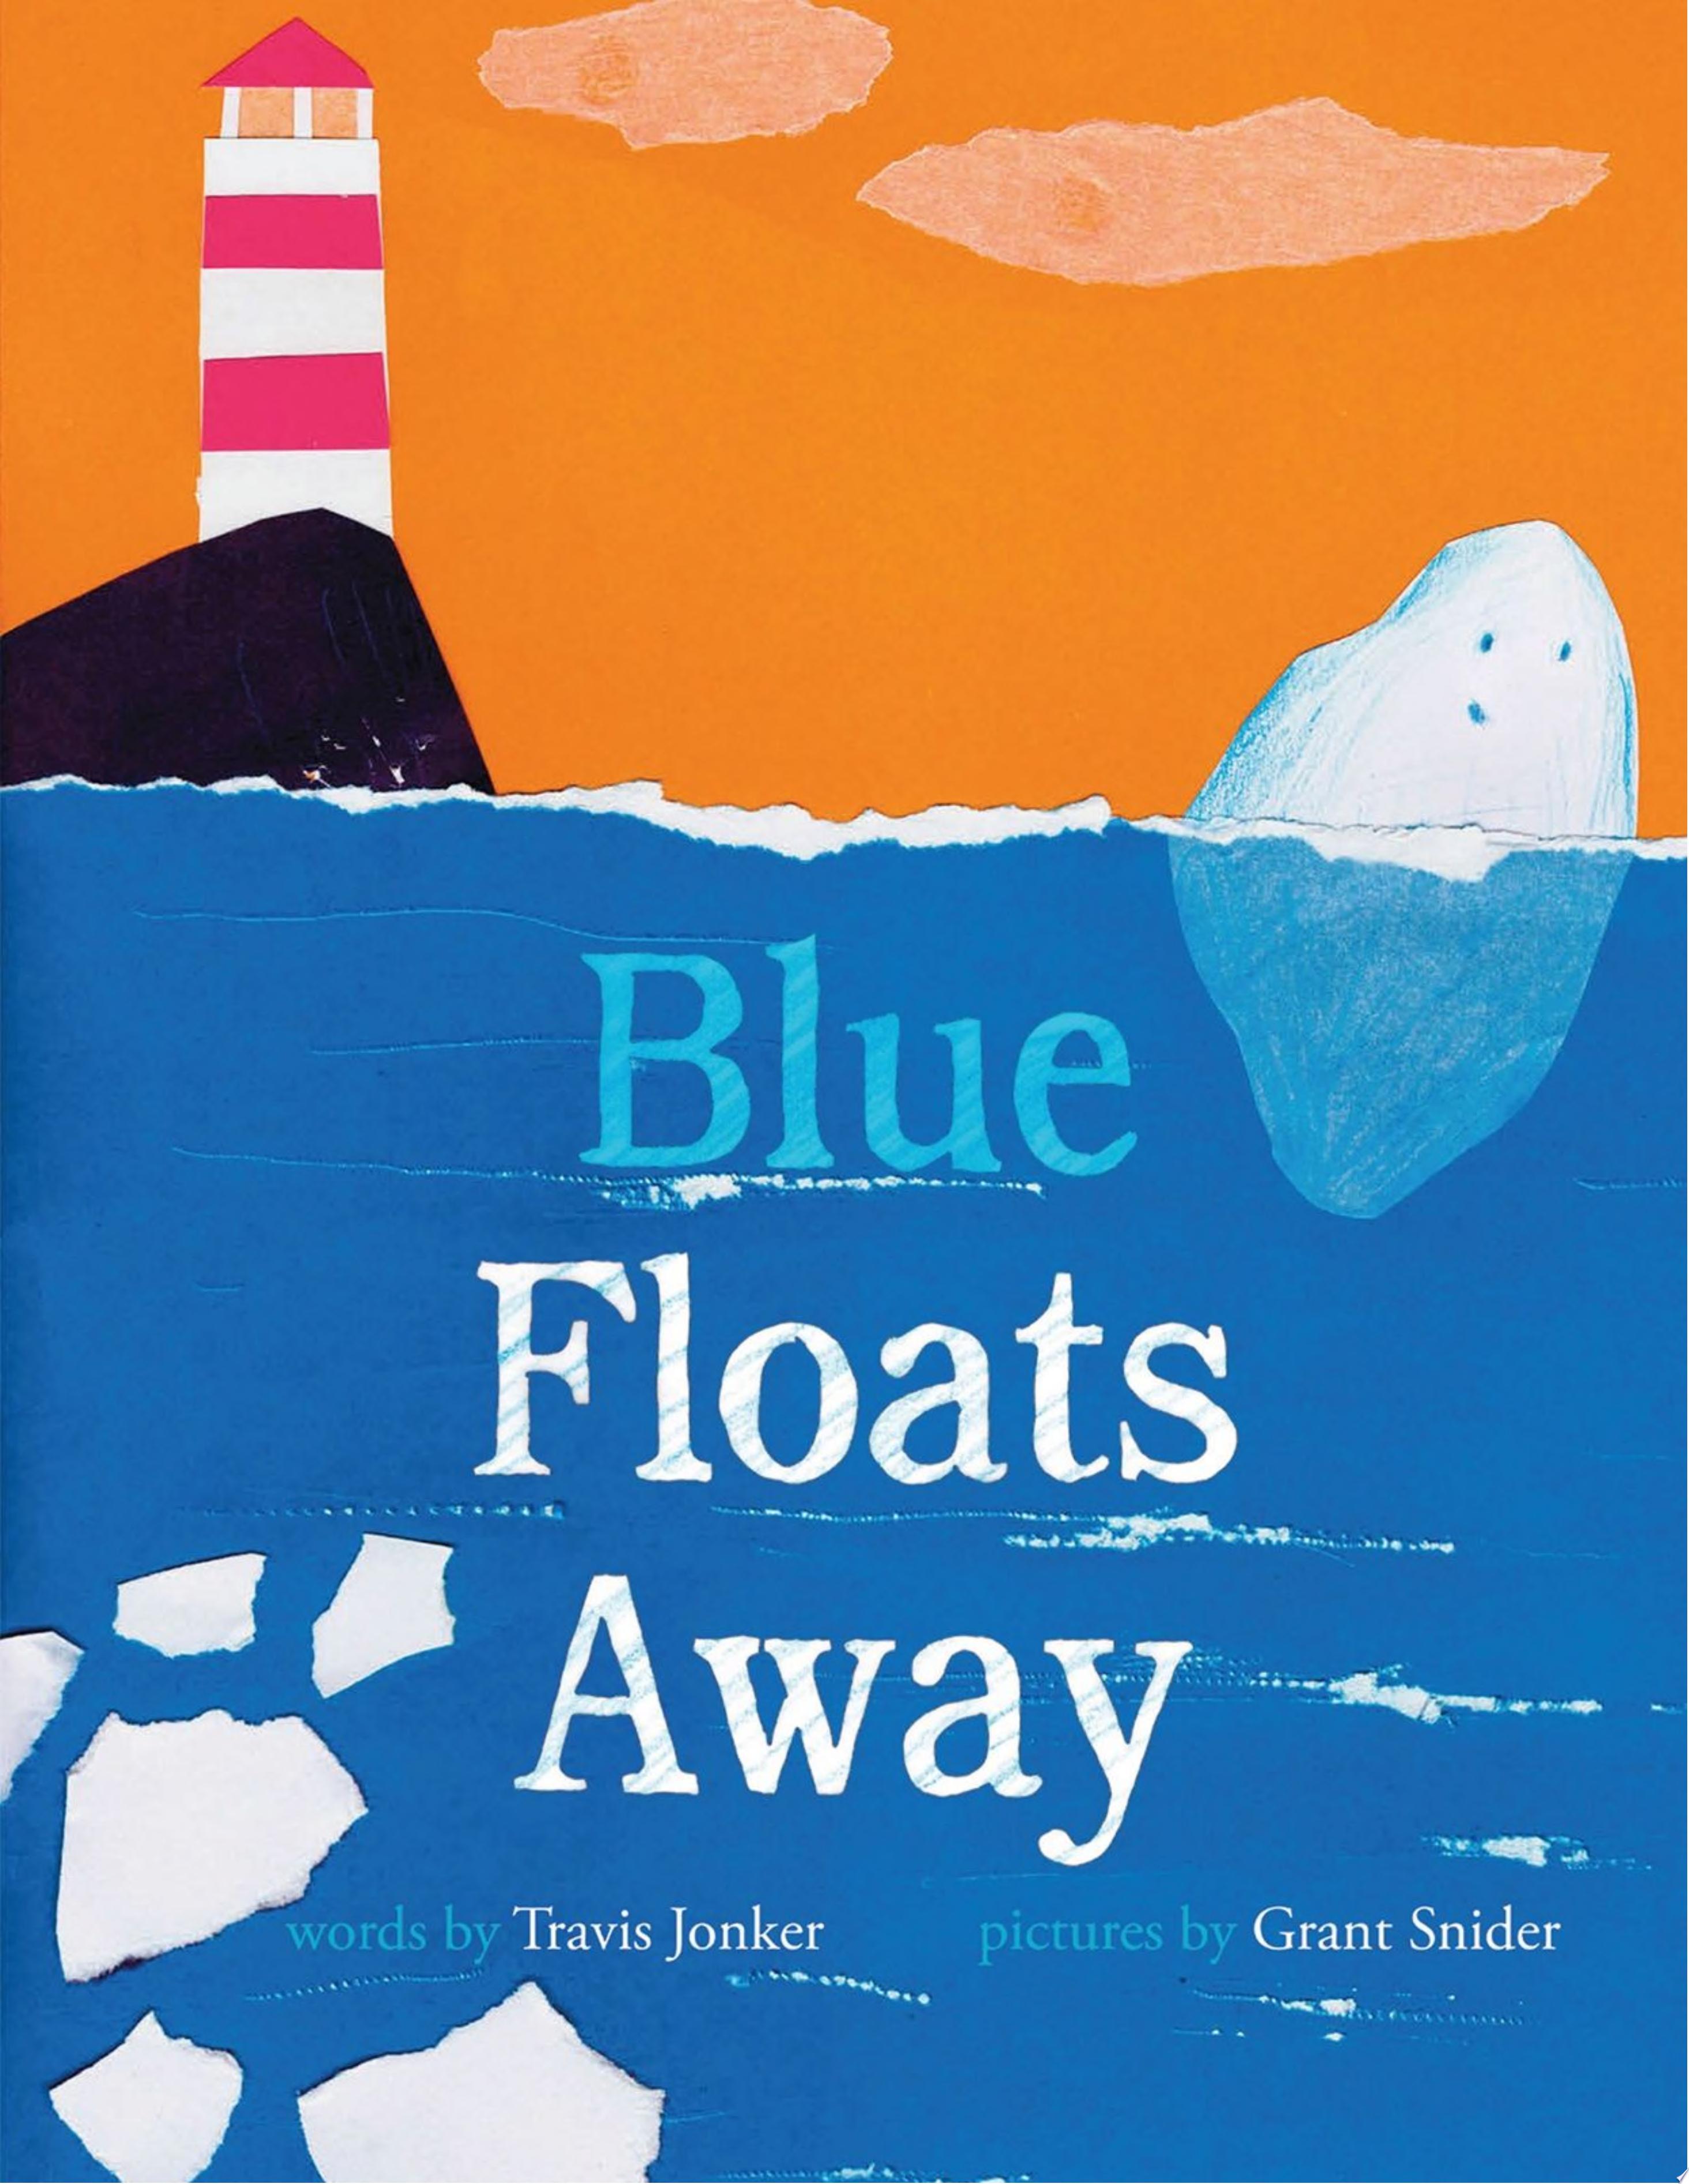 Image for "Blue Floats Away"